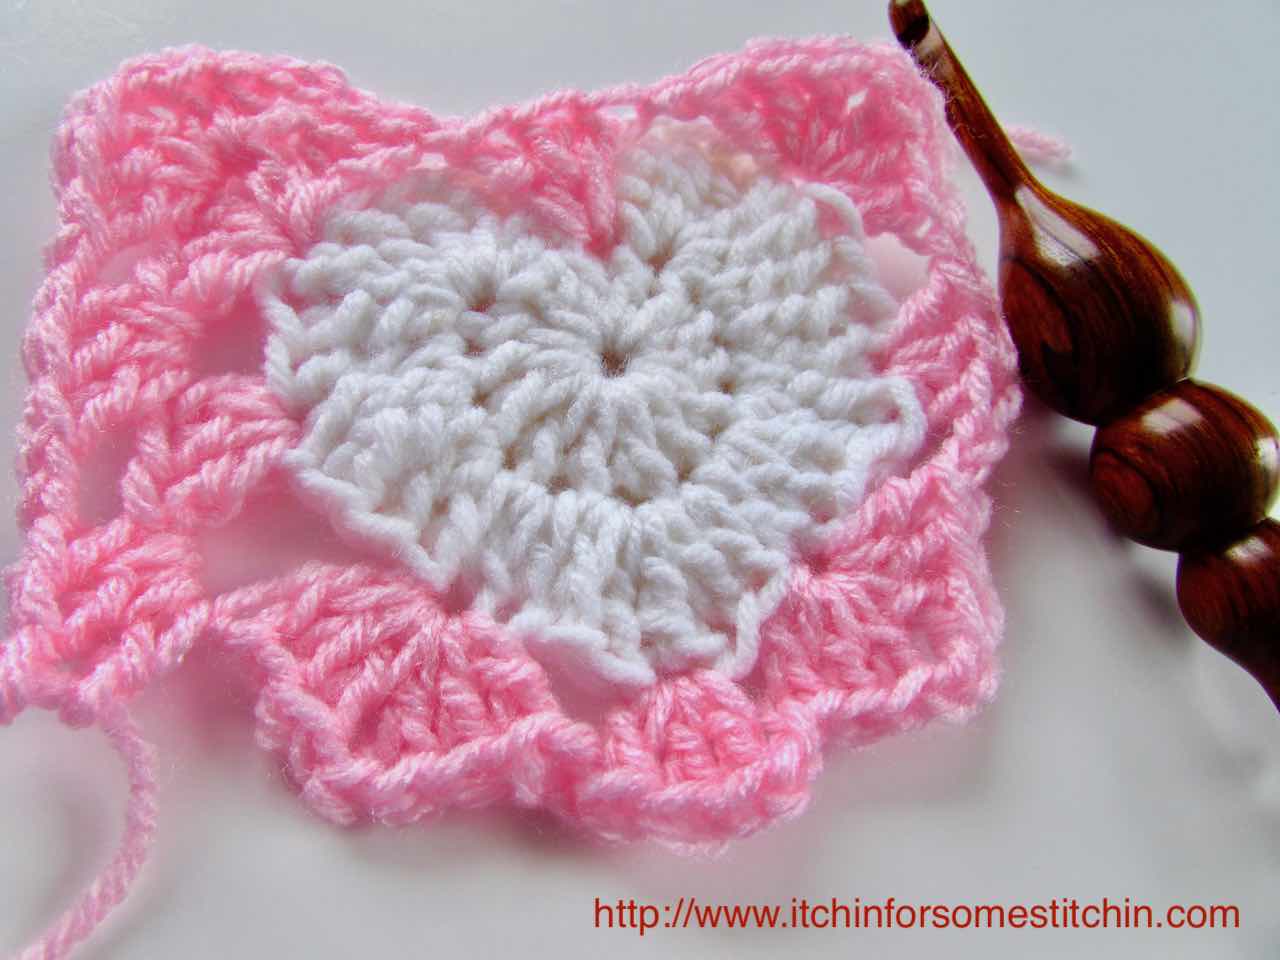 How to crochet a Granny Heart Square tutorial by https://www.itchinforsomestitchin.com